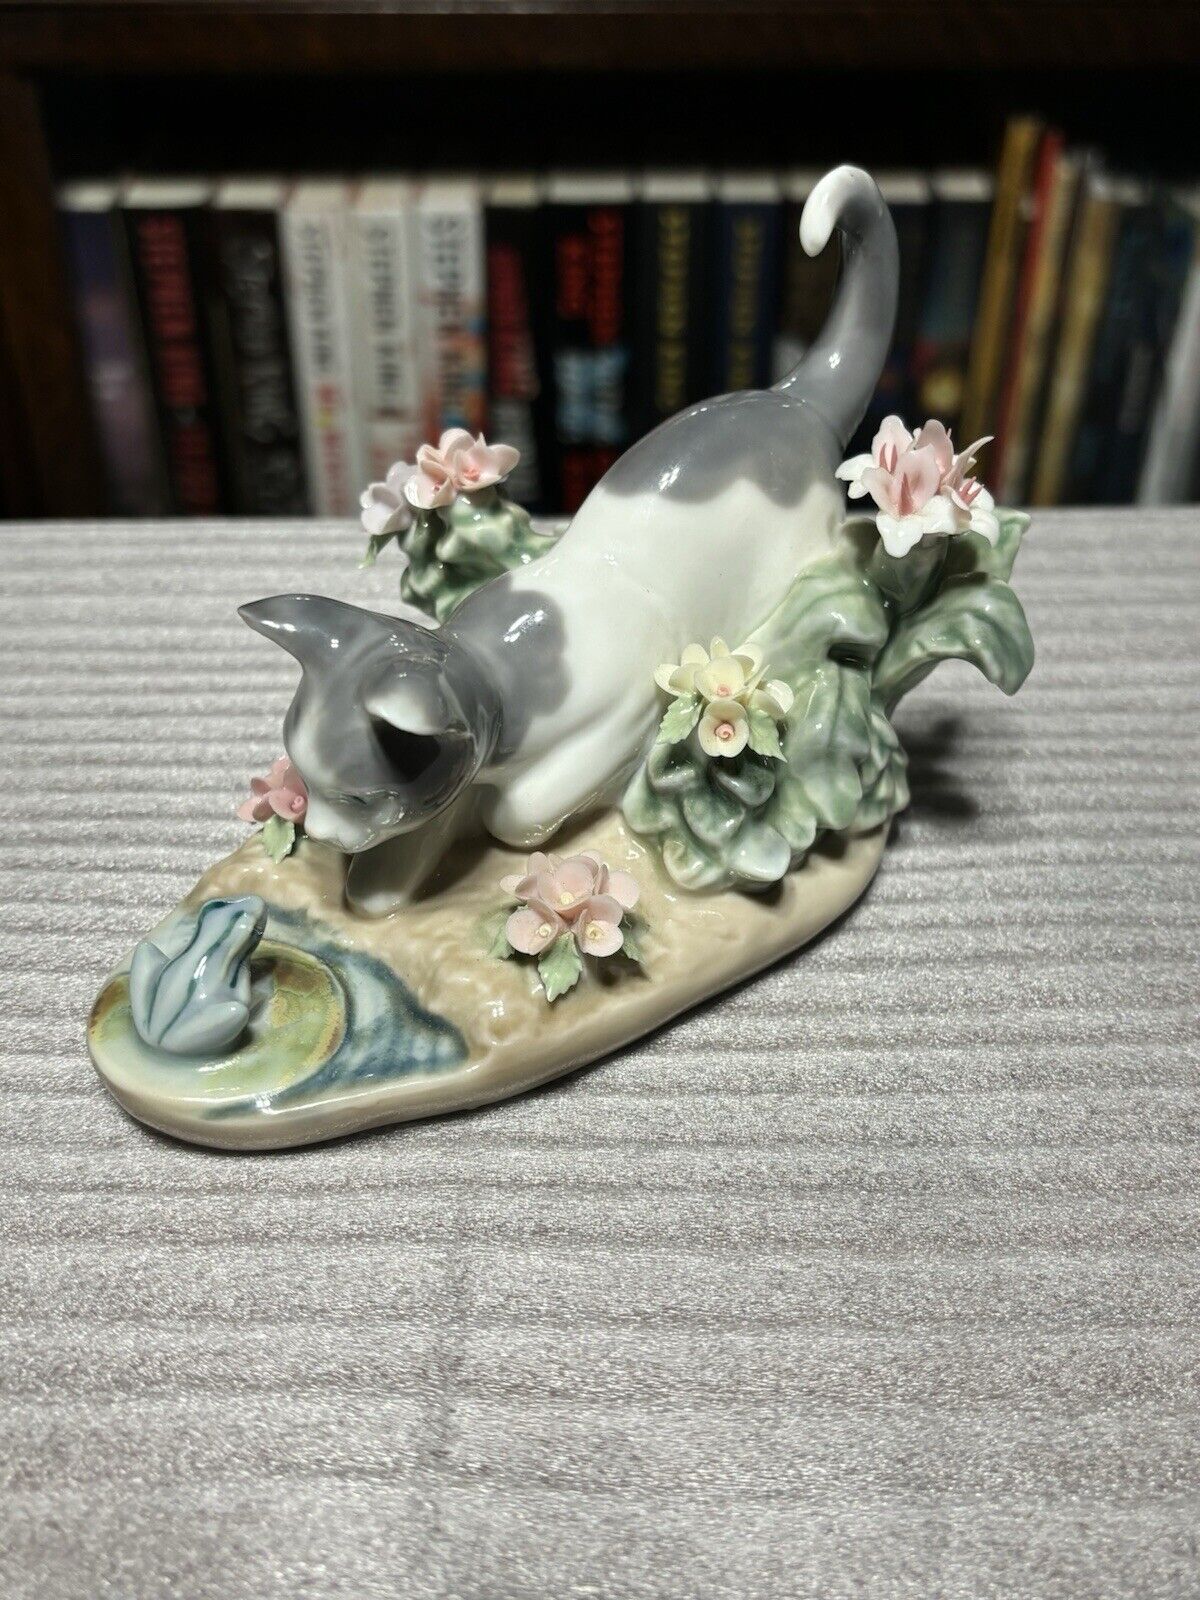 Lladro 1442 “Kitty Confrontation”  Cat with Frog & Flowers Porcelain Figurine